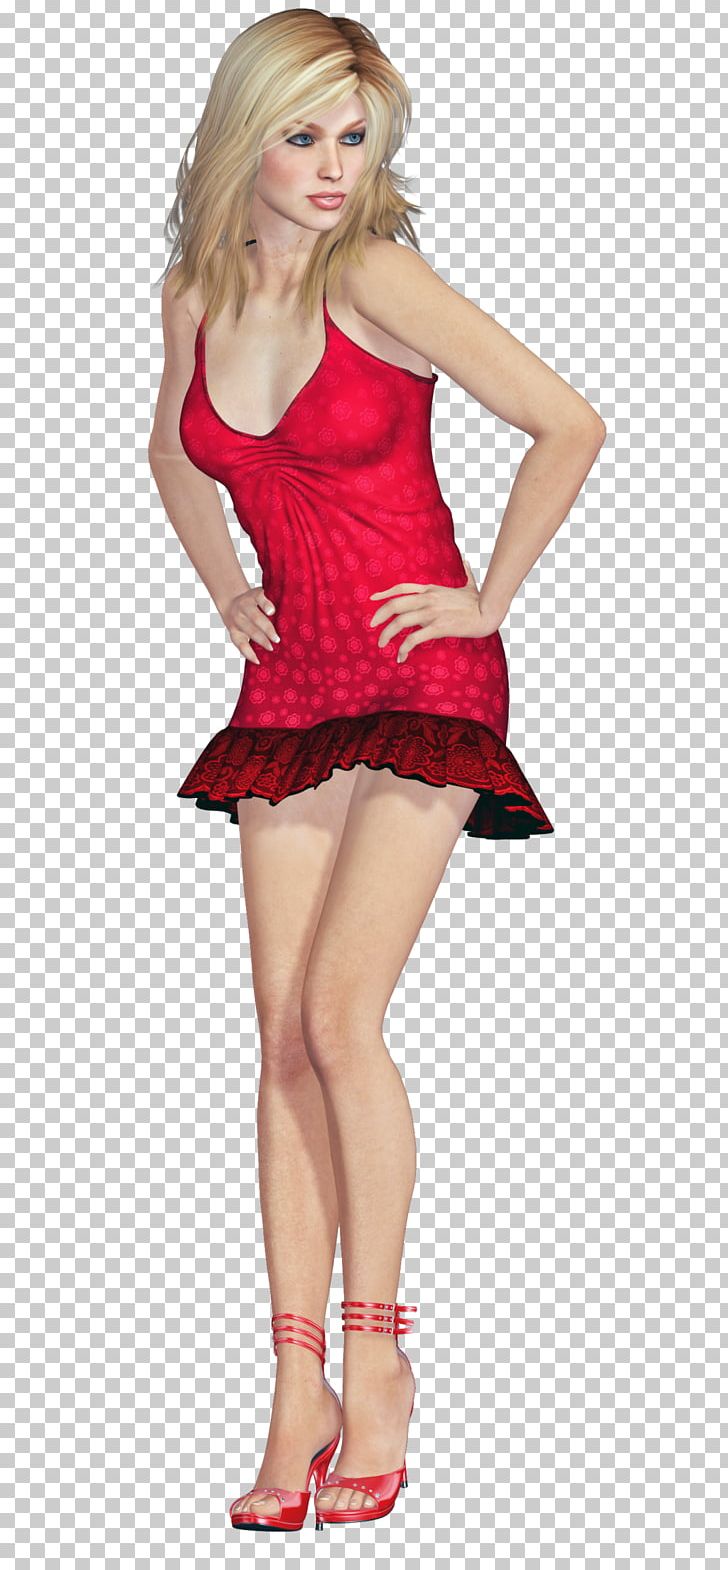 Clothing Woman Model Dress PNG, Clipart, 3d Rendering, Celebrities, Clothing, Cocktail Dress, Costume Free PNG Download